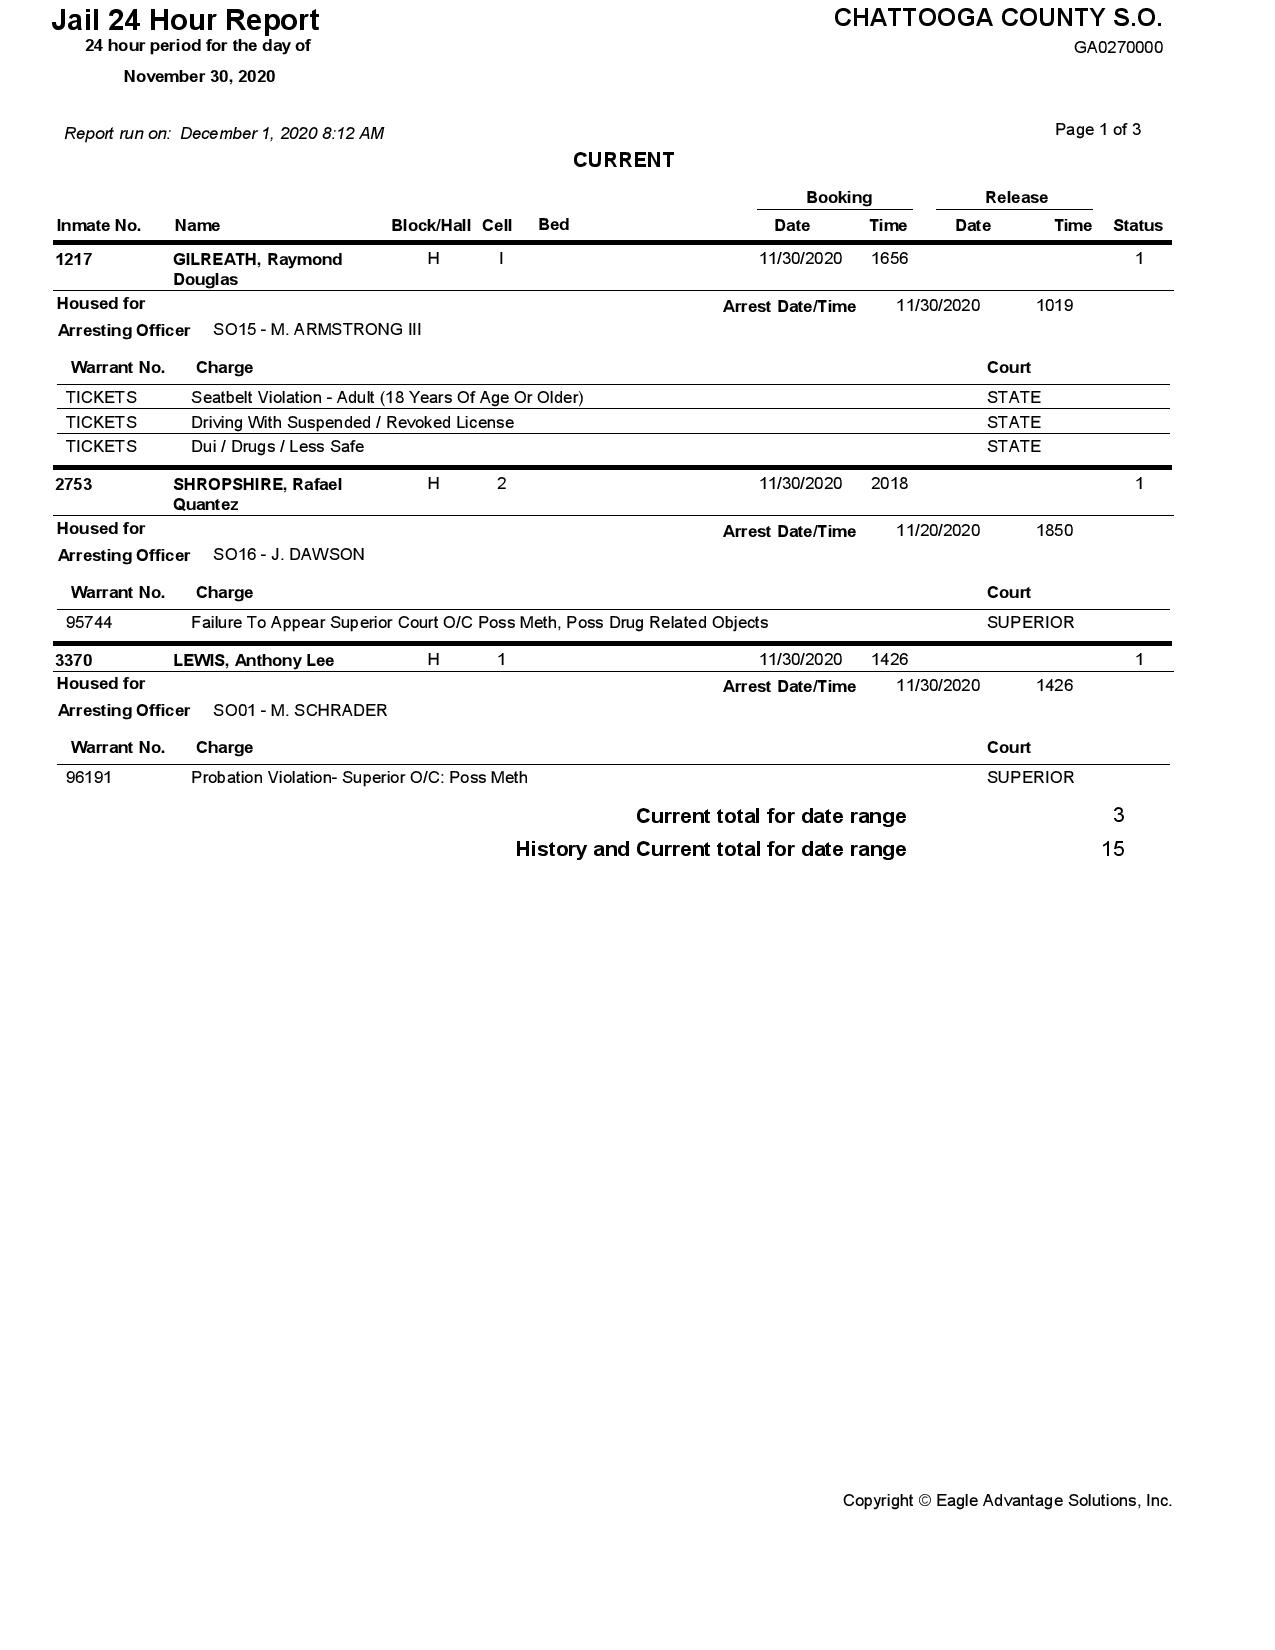 chattooga jail24 12.01.20-page-001